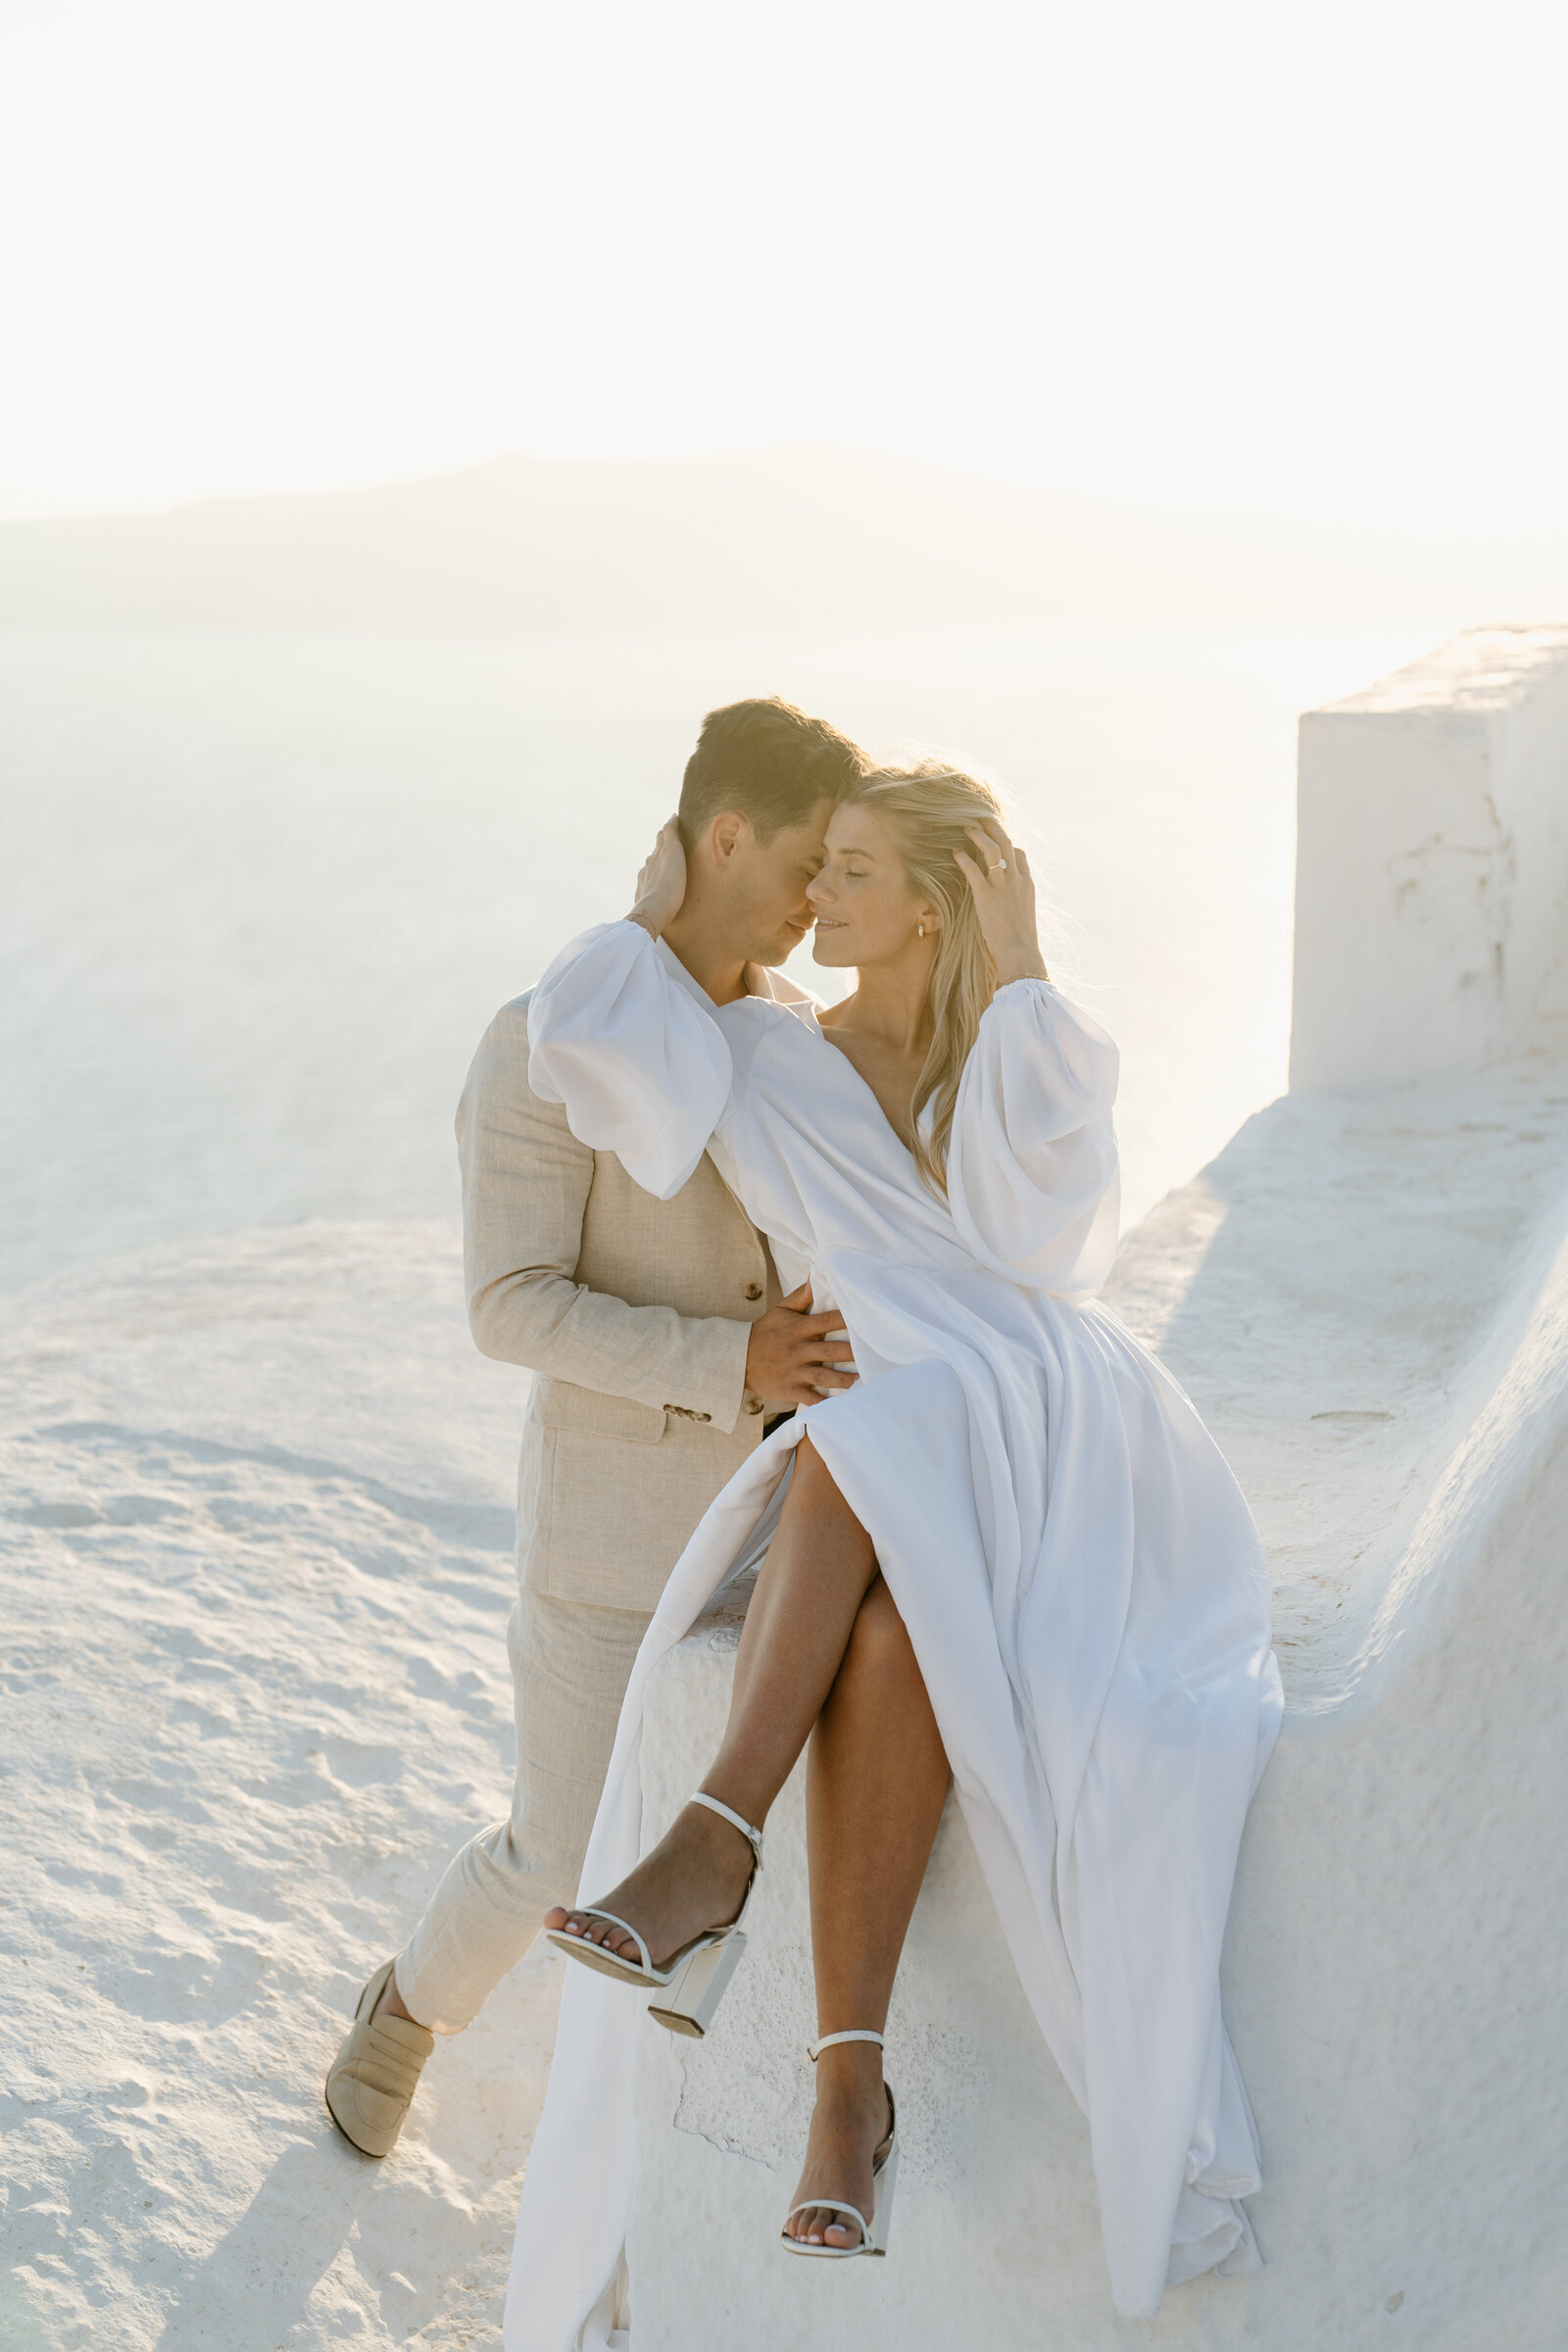 Couple in wedding attire elopeing on top of an iconic white dome church in Santorini Greece